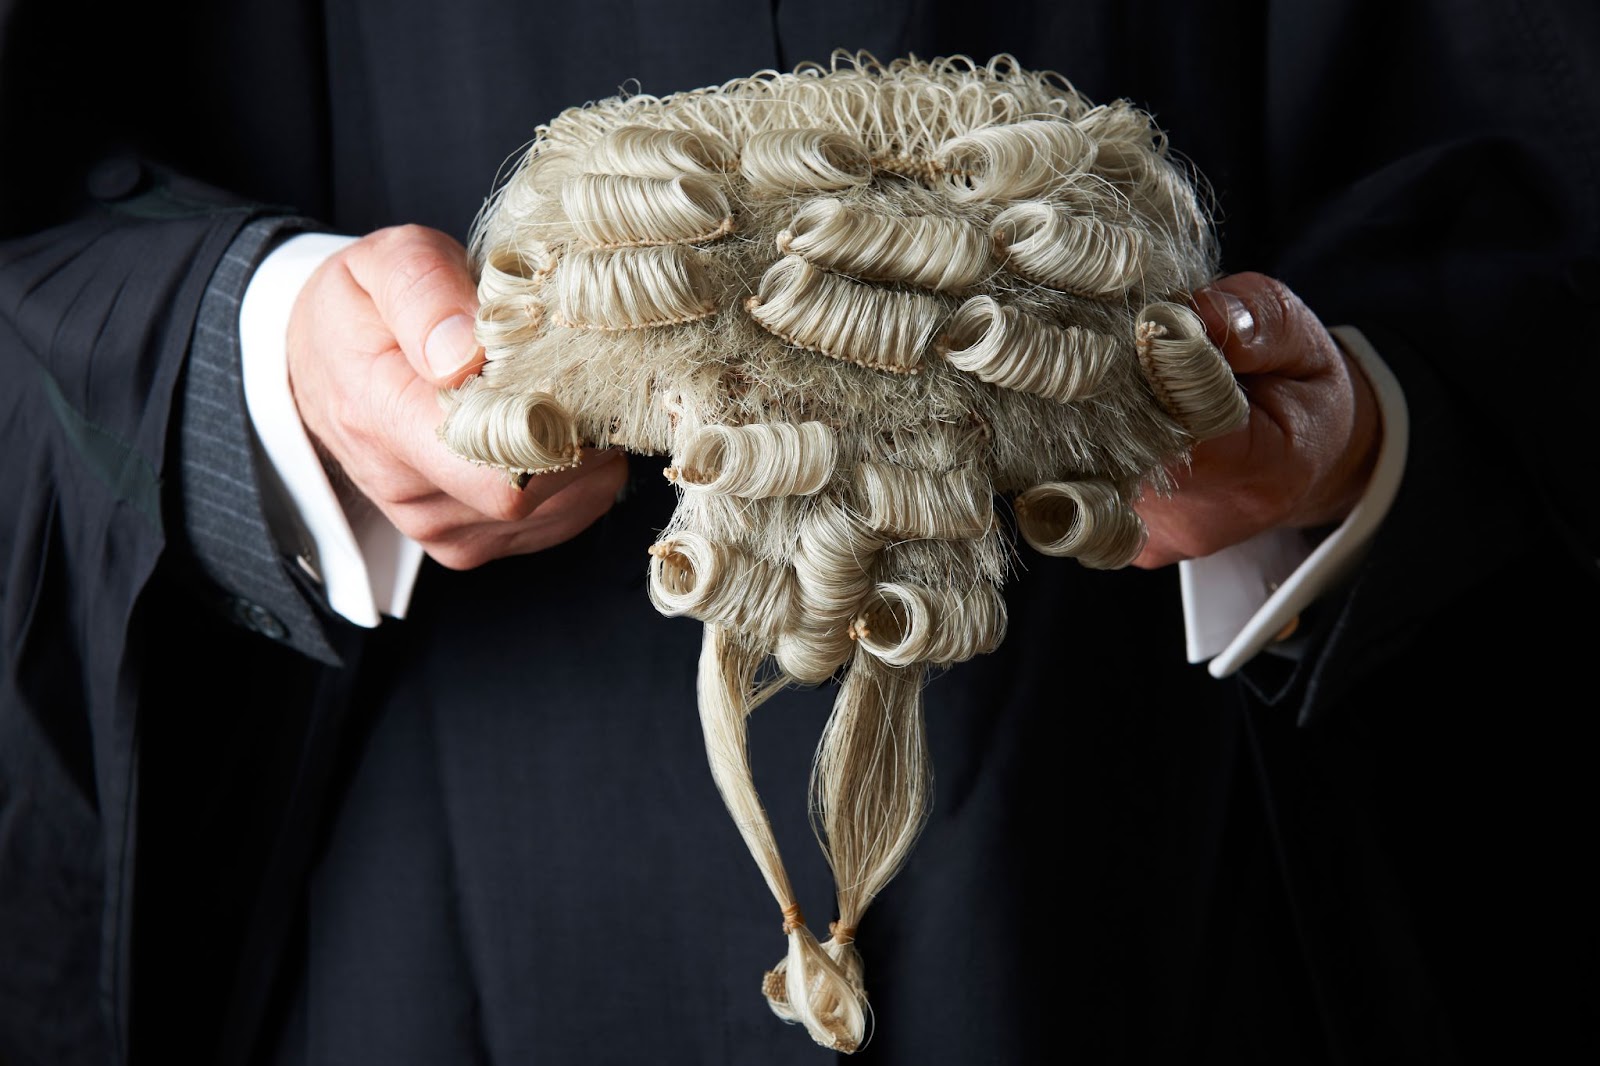 "Barrister holding wig"